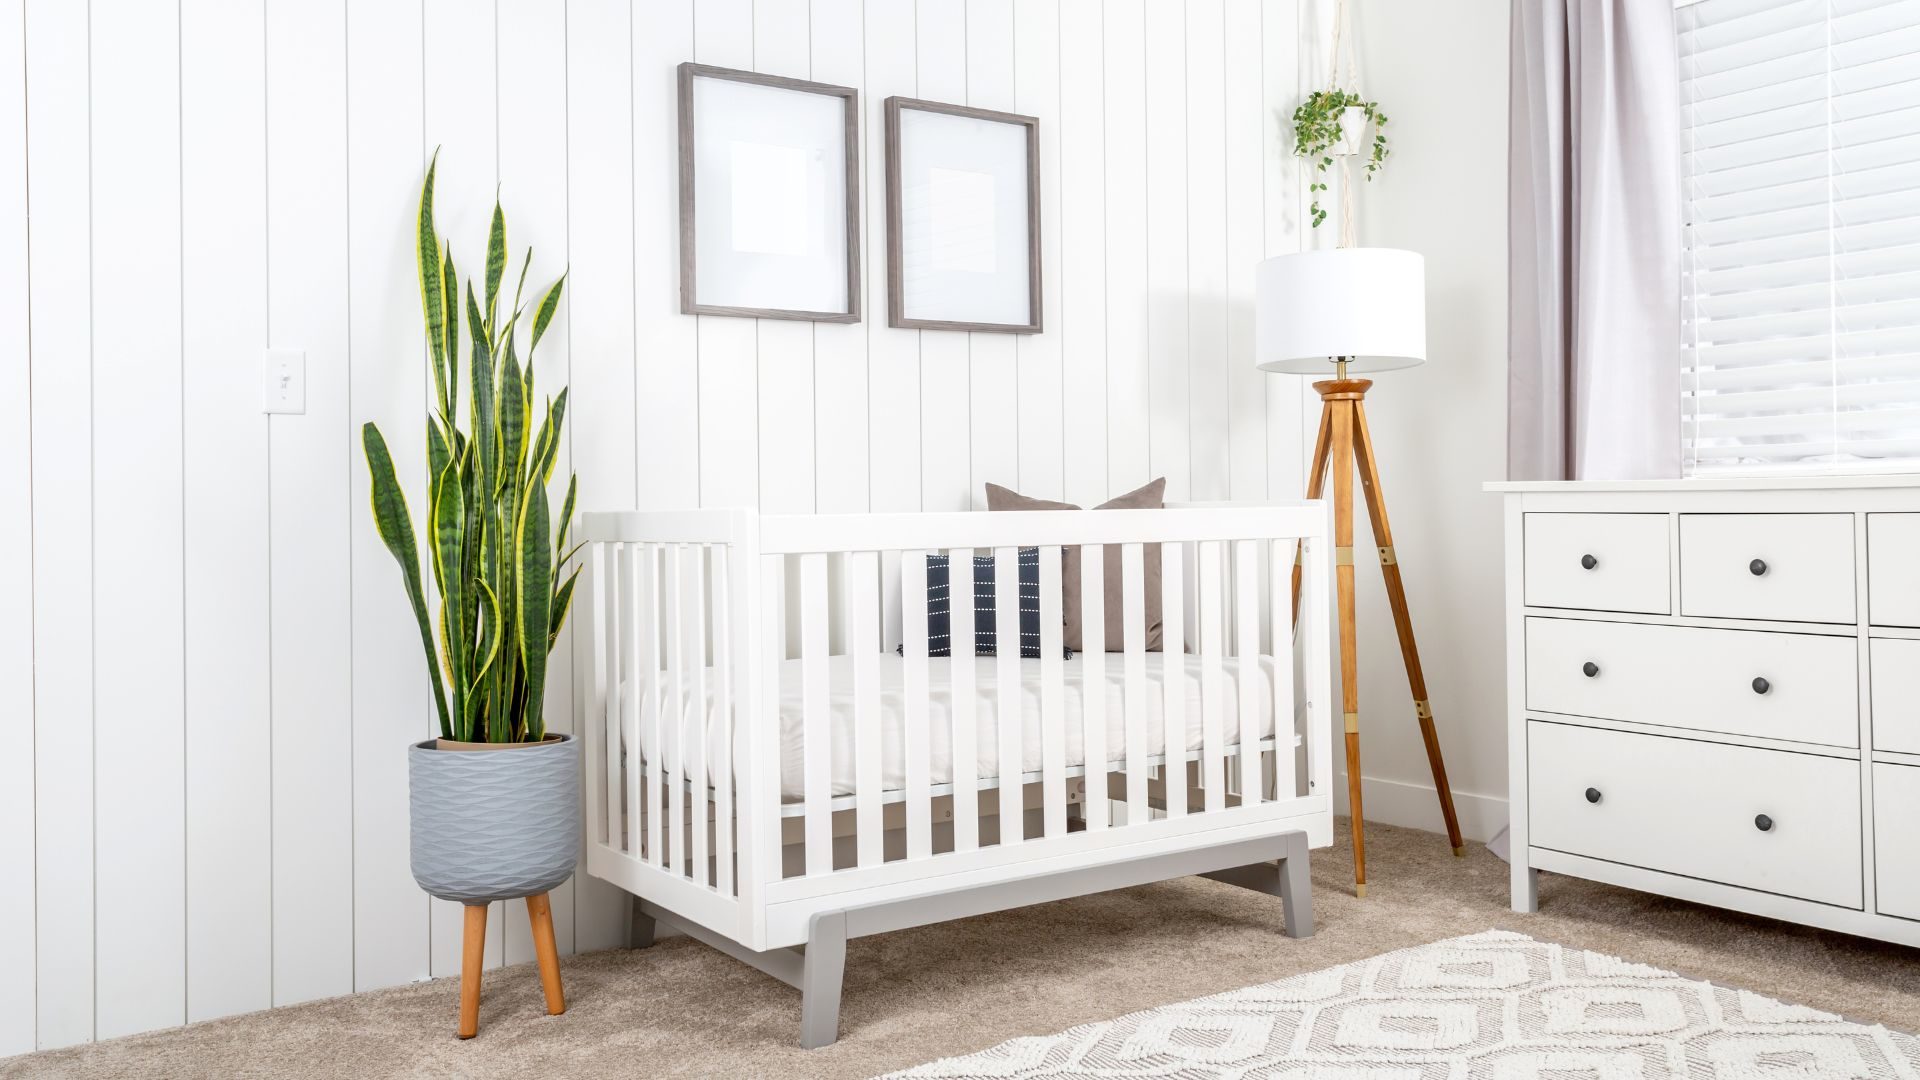 How To Design a Nursery for a Small Room